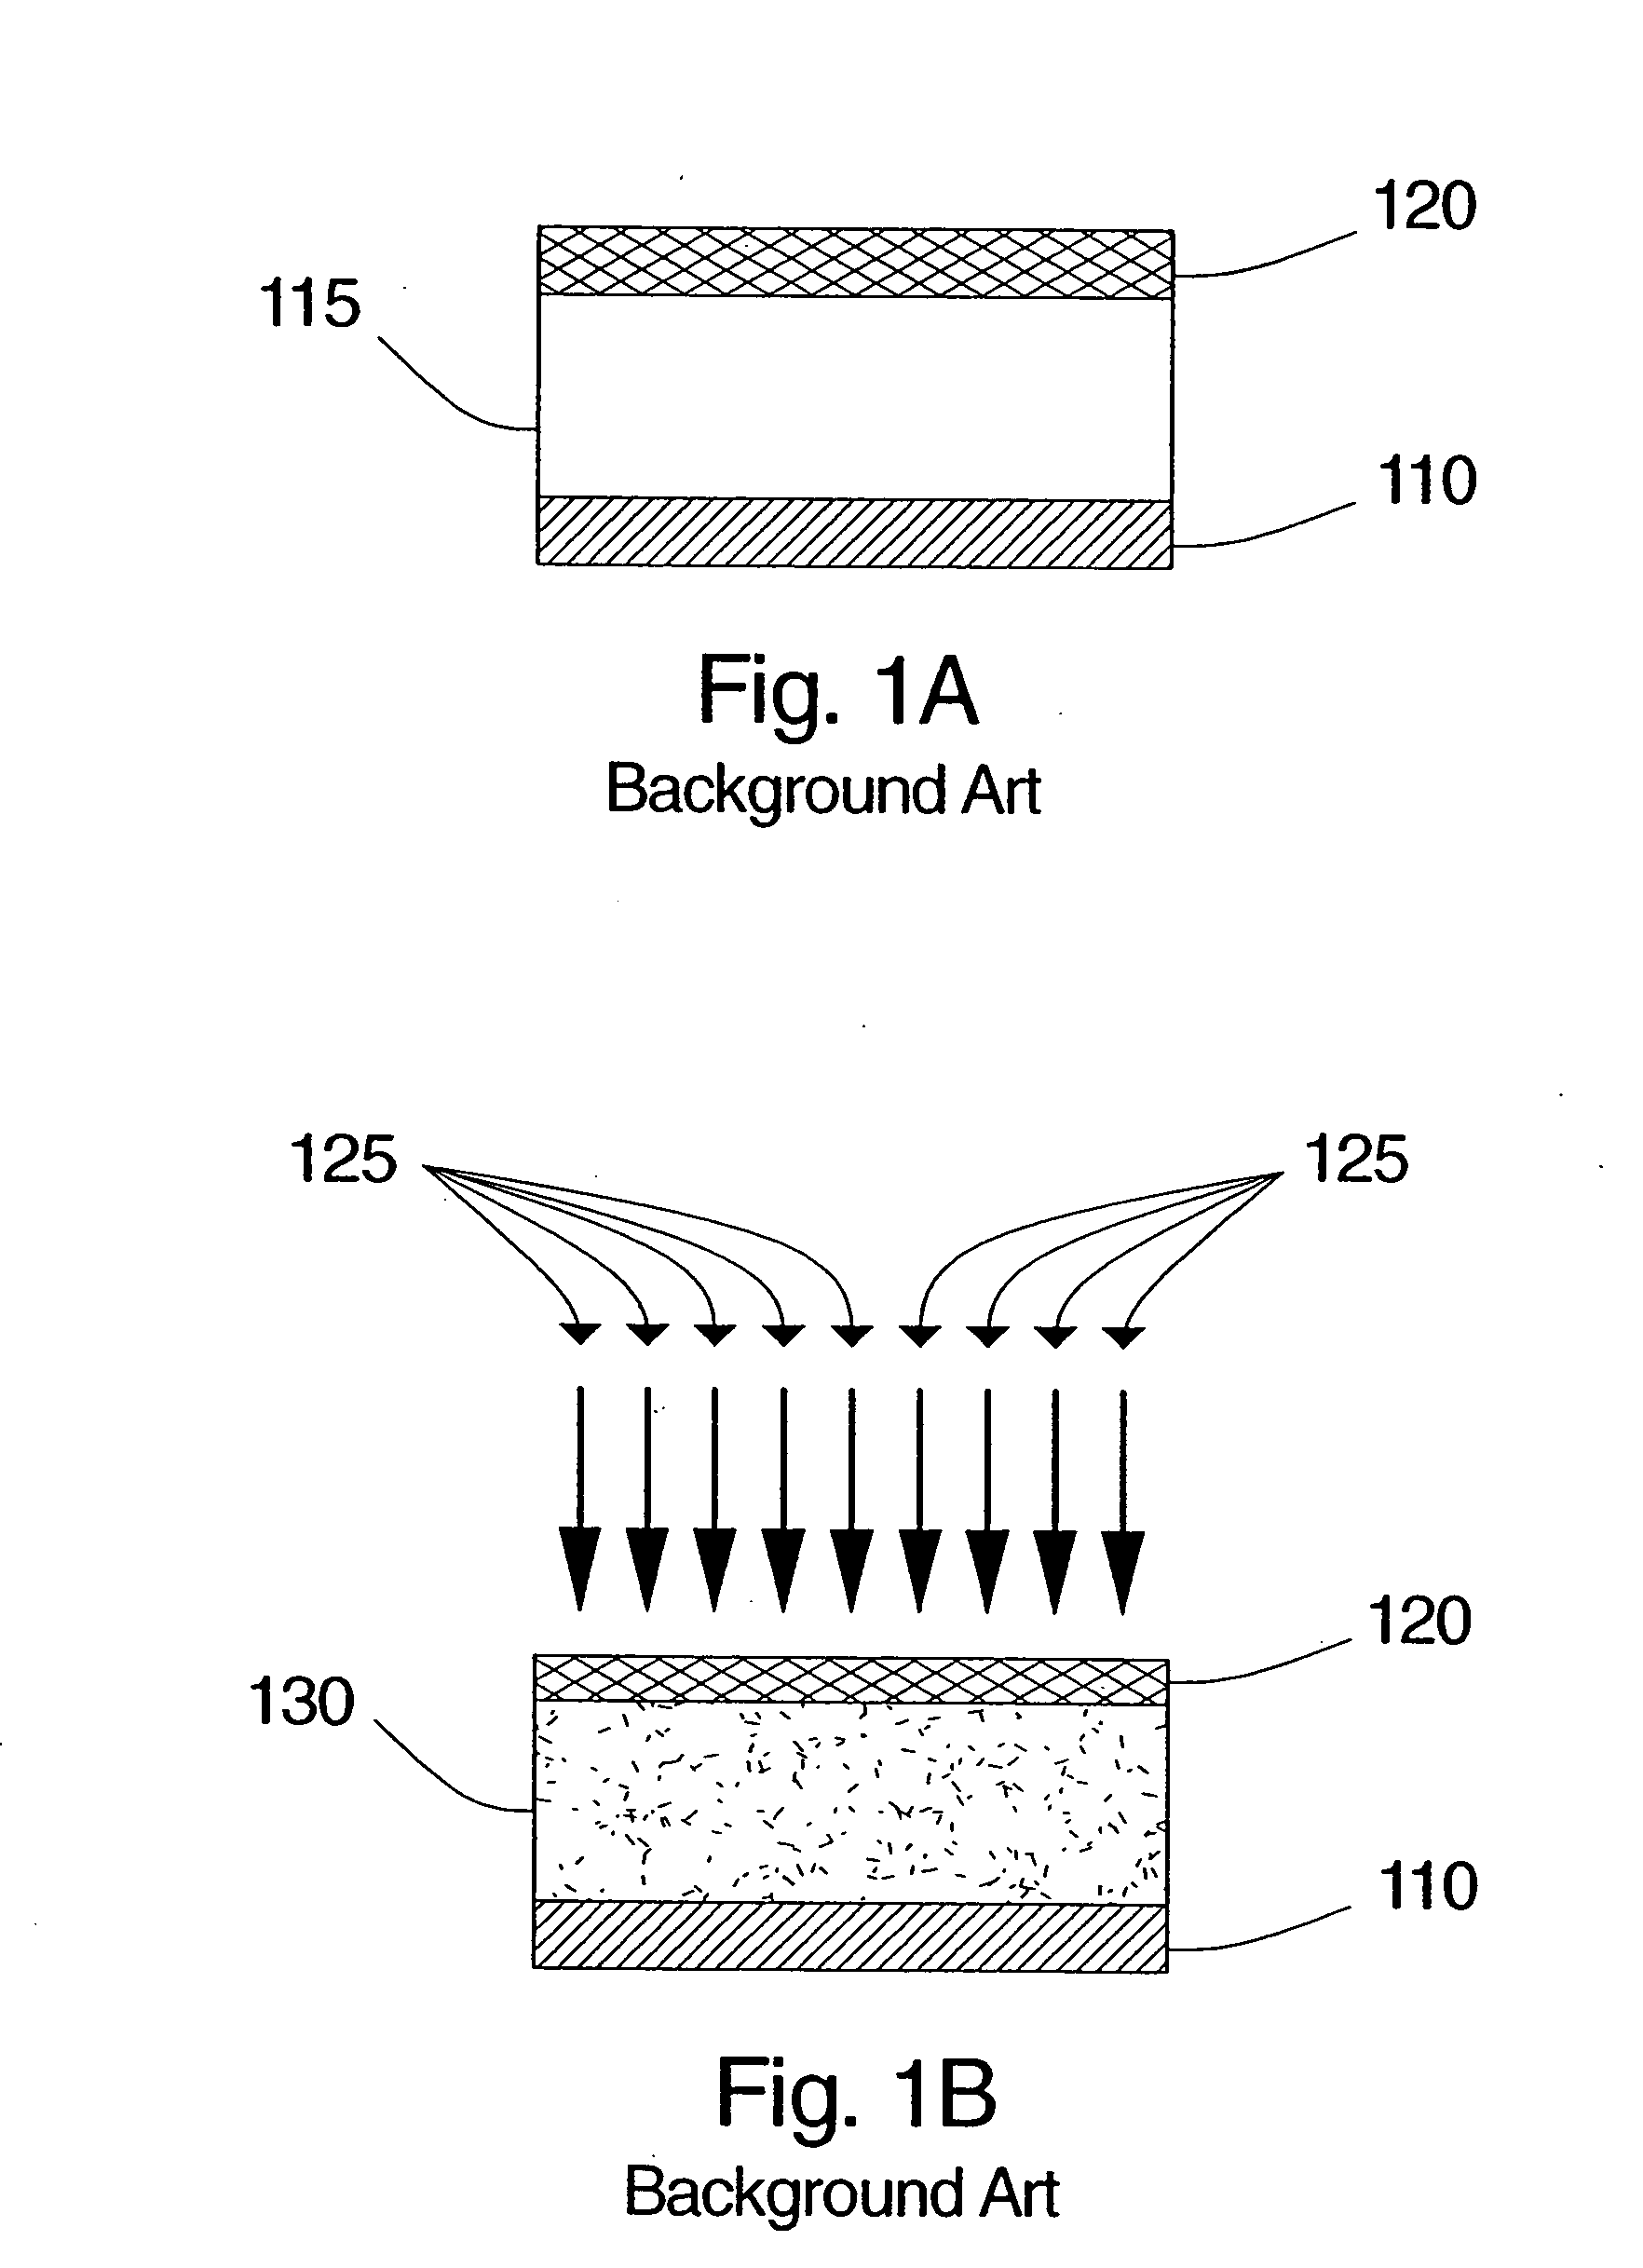 Integrated circuit device and fabrication using metal-doped chalcogenide materials